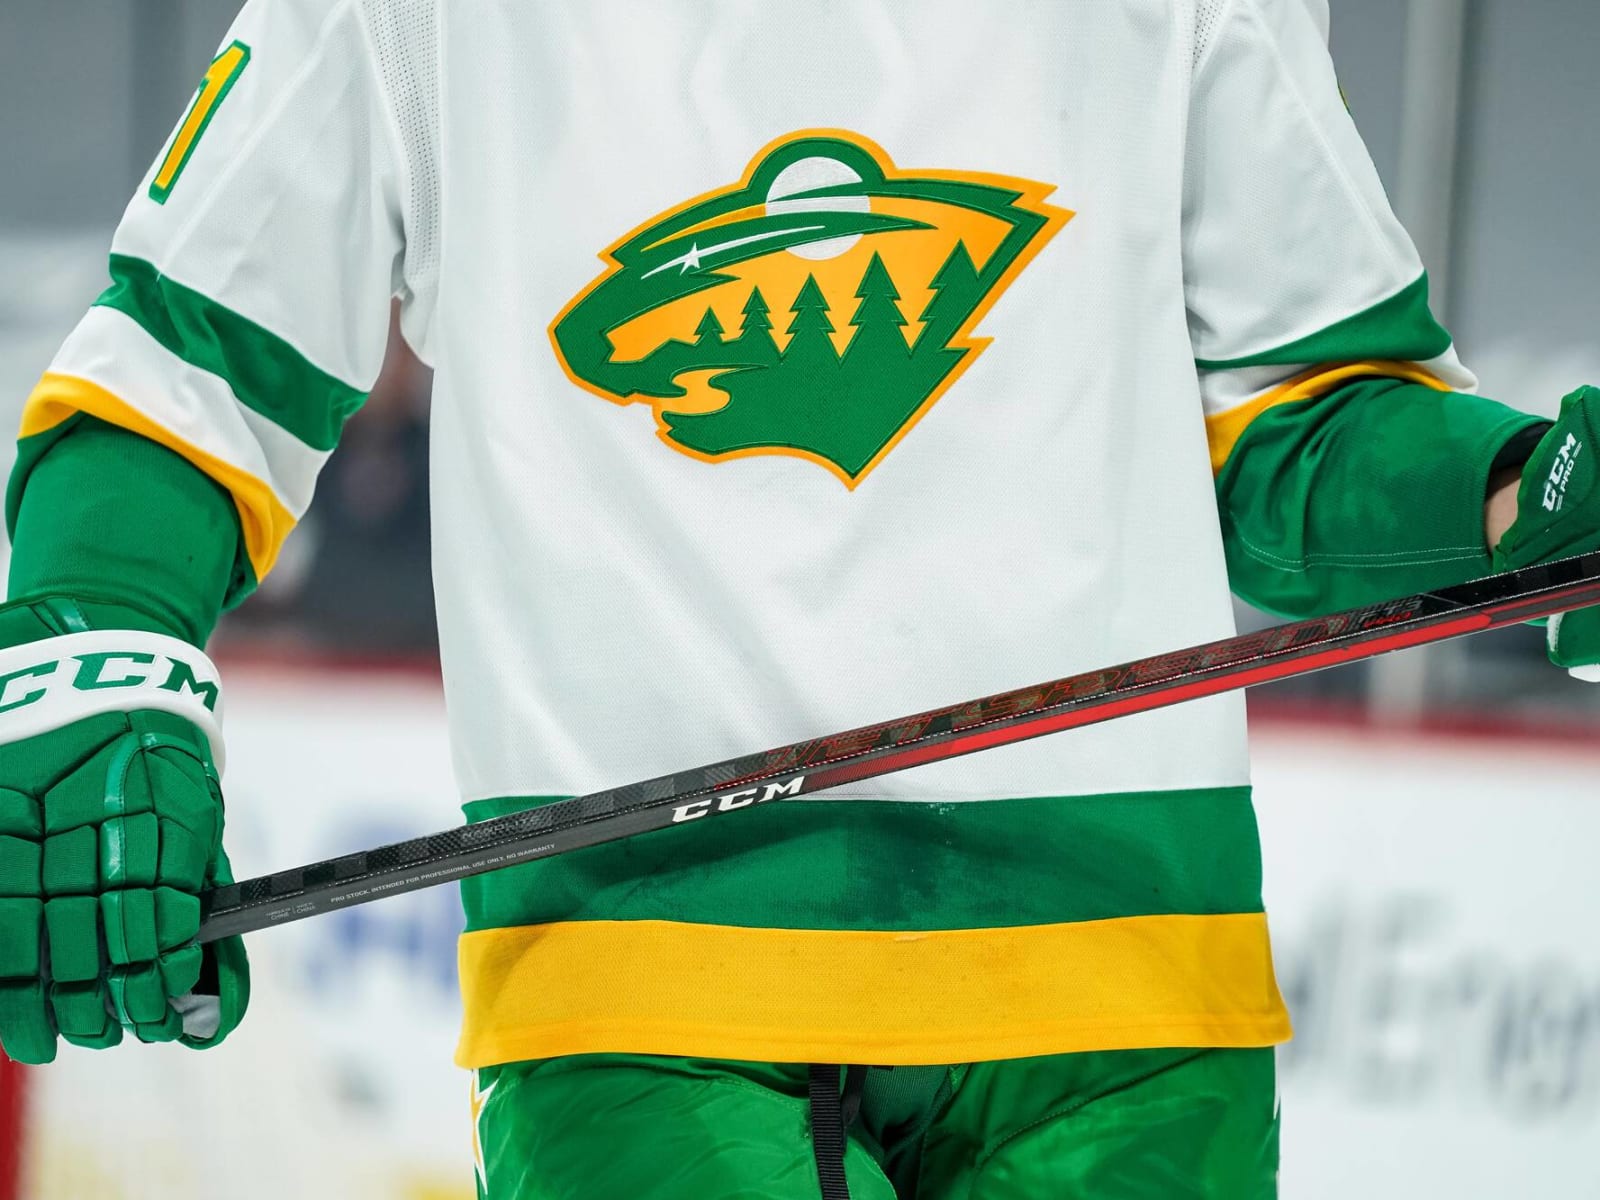 Wild unveil North Stars-themed retro jerseys: Inside how it came